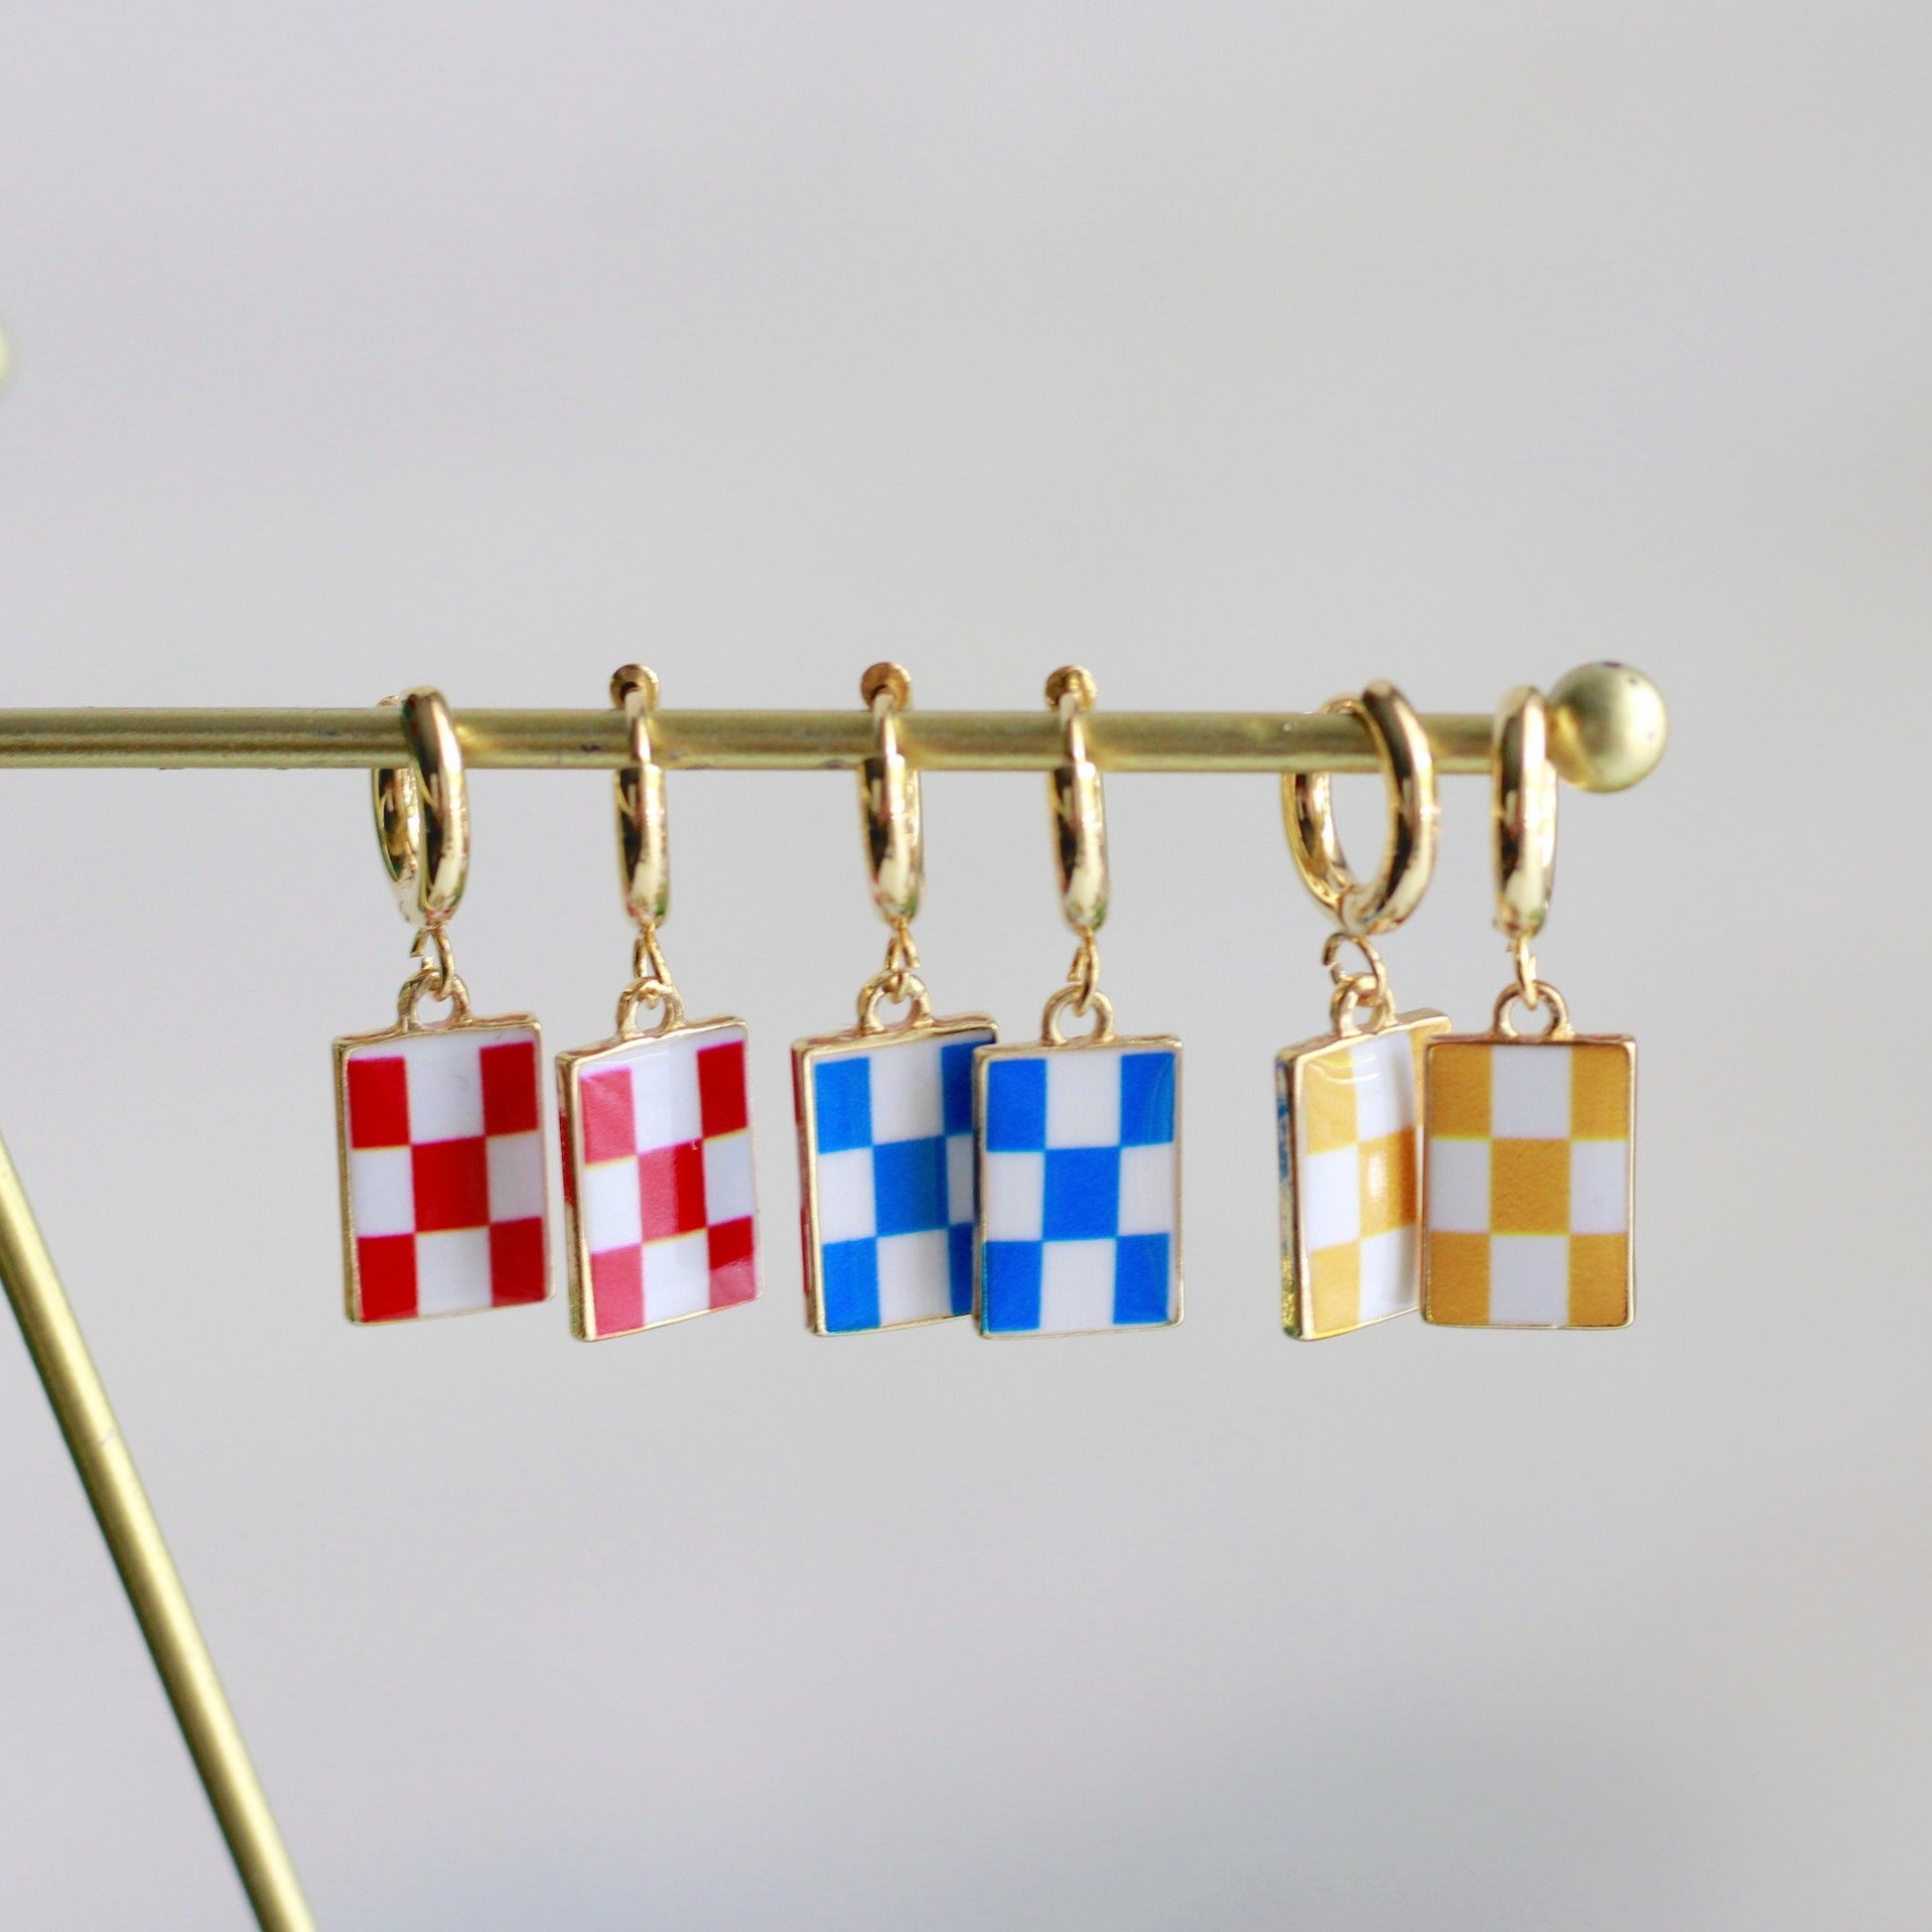 checkerboard earrings, red blue yellow checkered earrings, 24k gold filled stainless steel huggie hoops